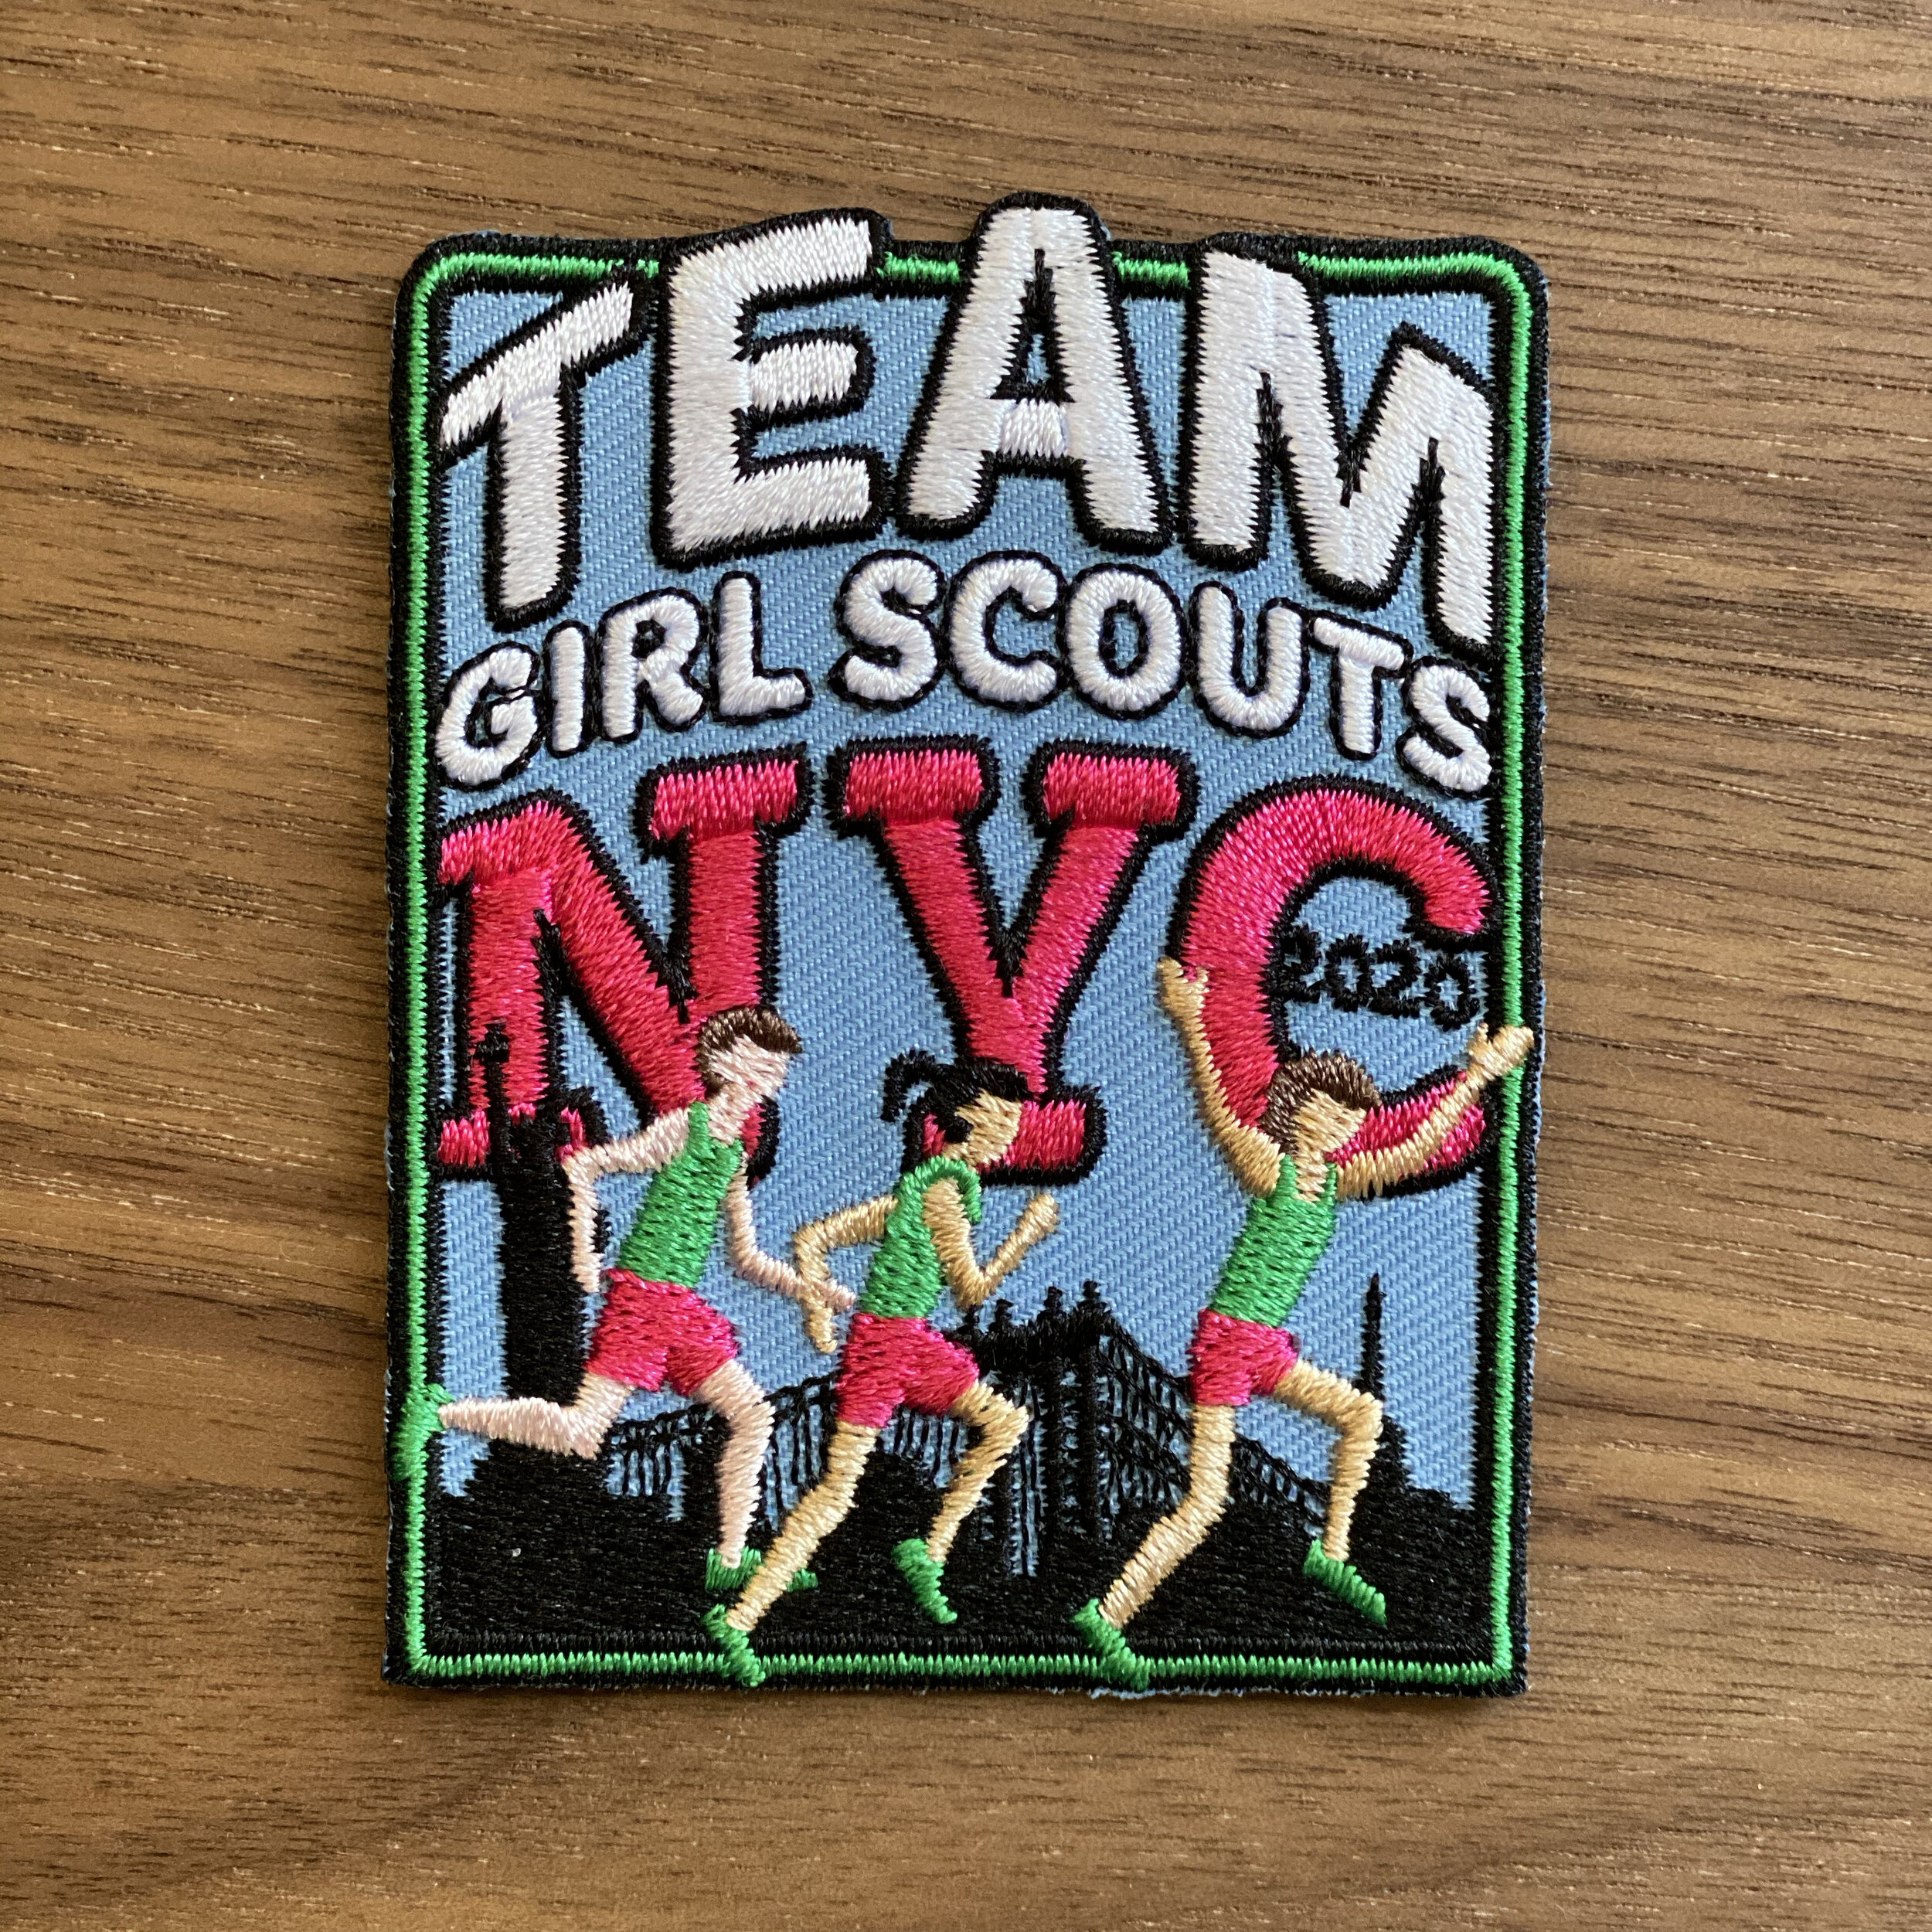 Team Girl Scouts patch